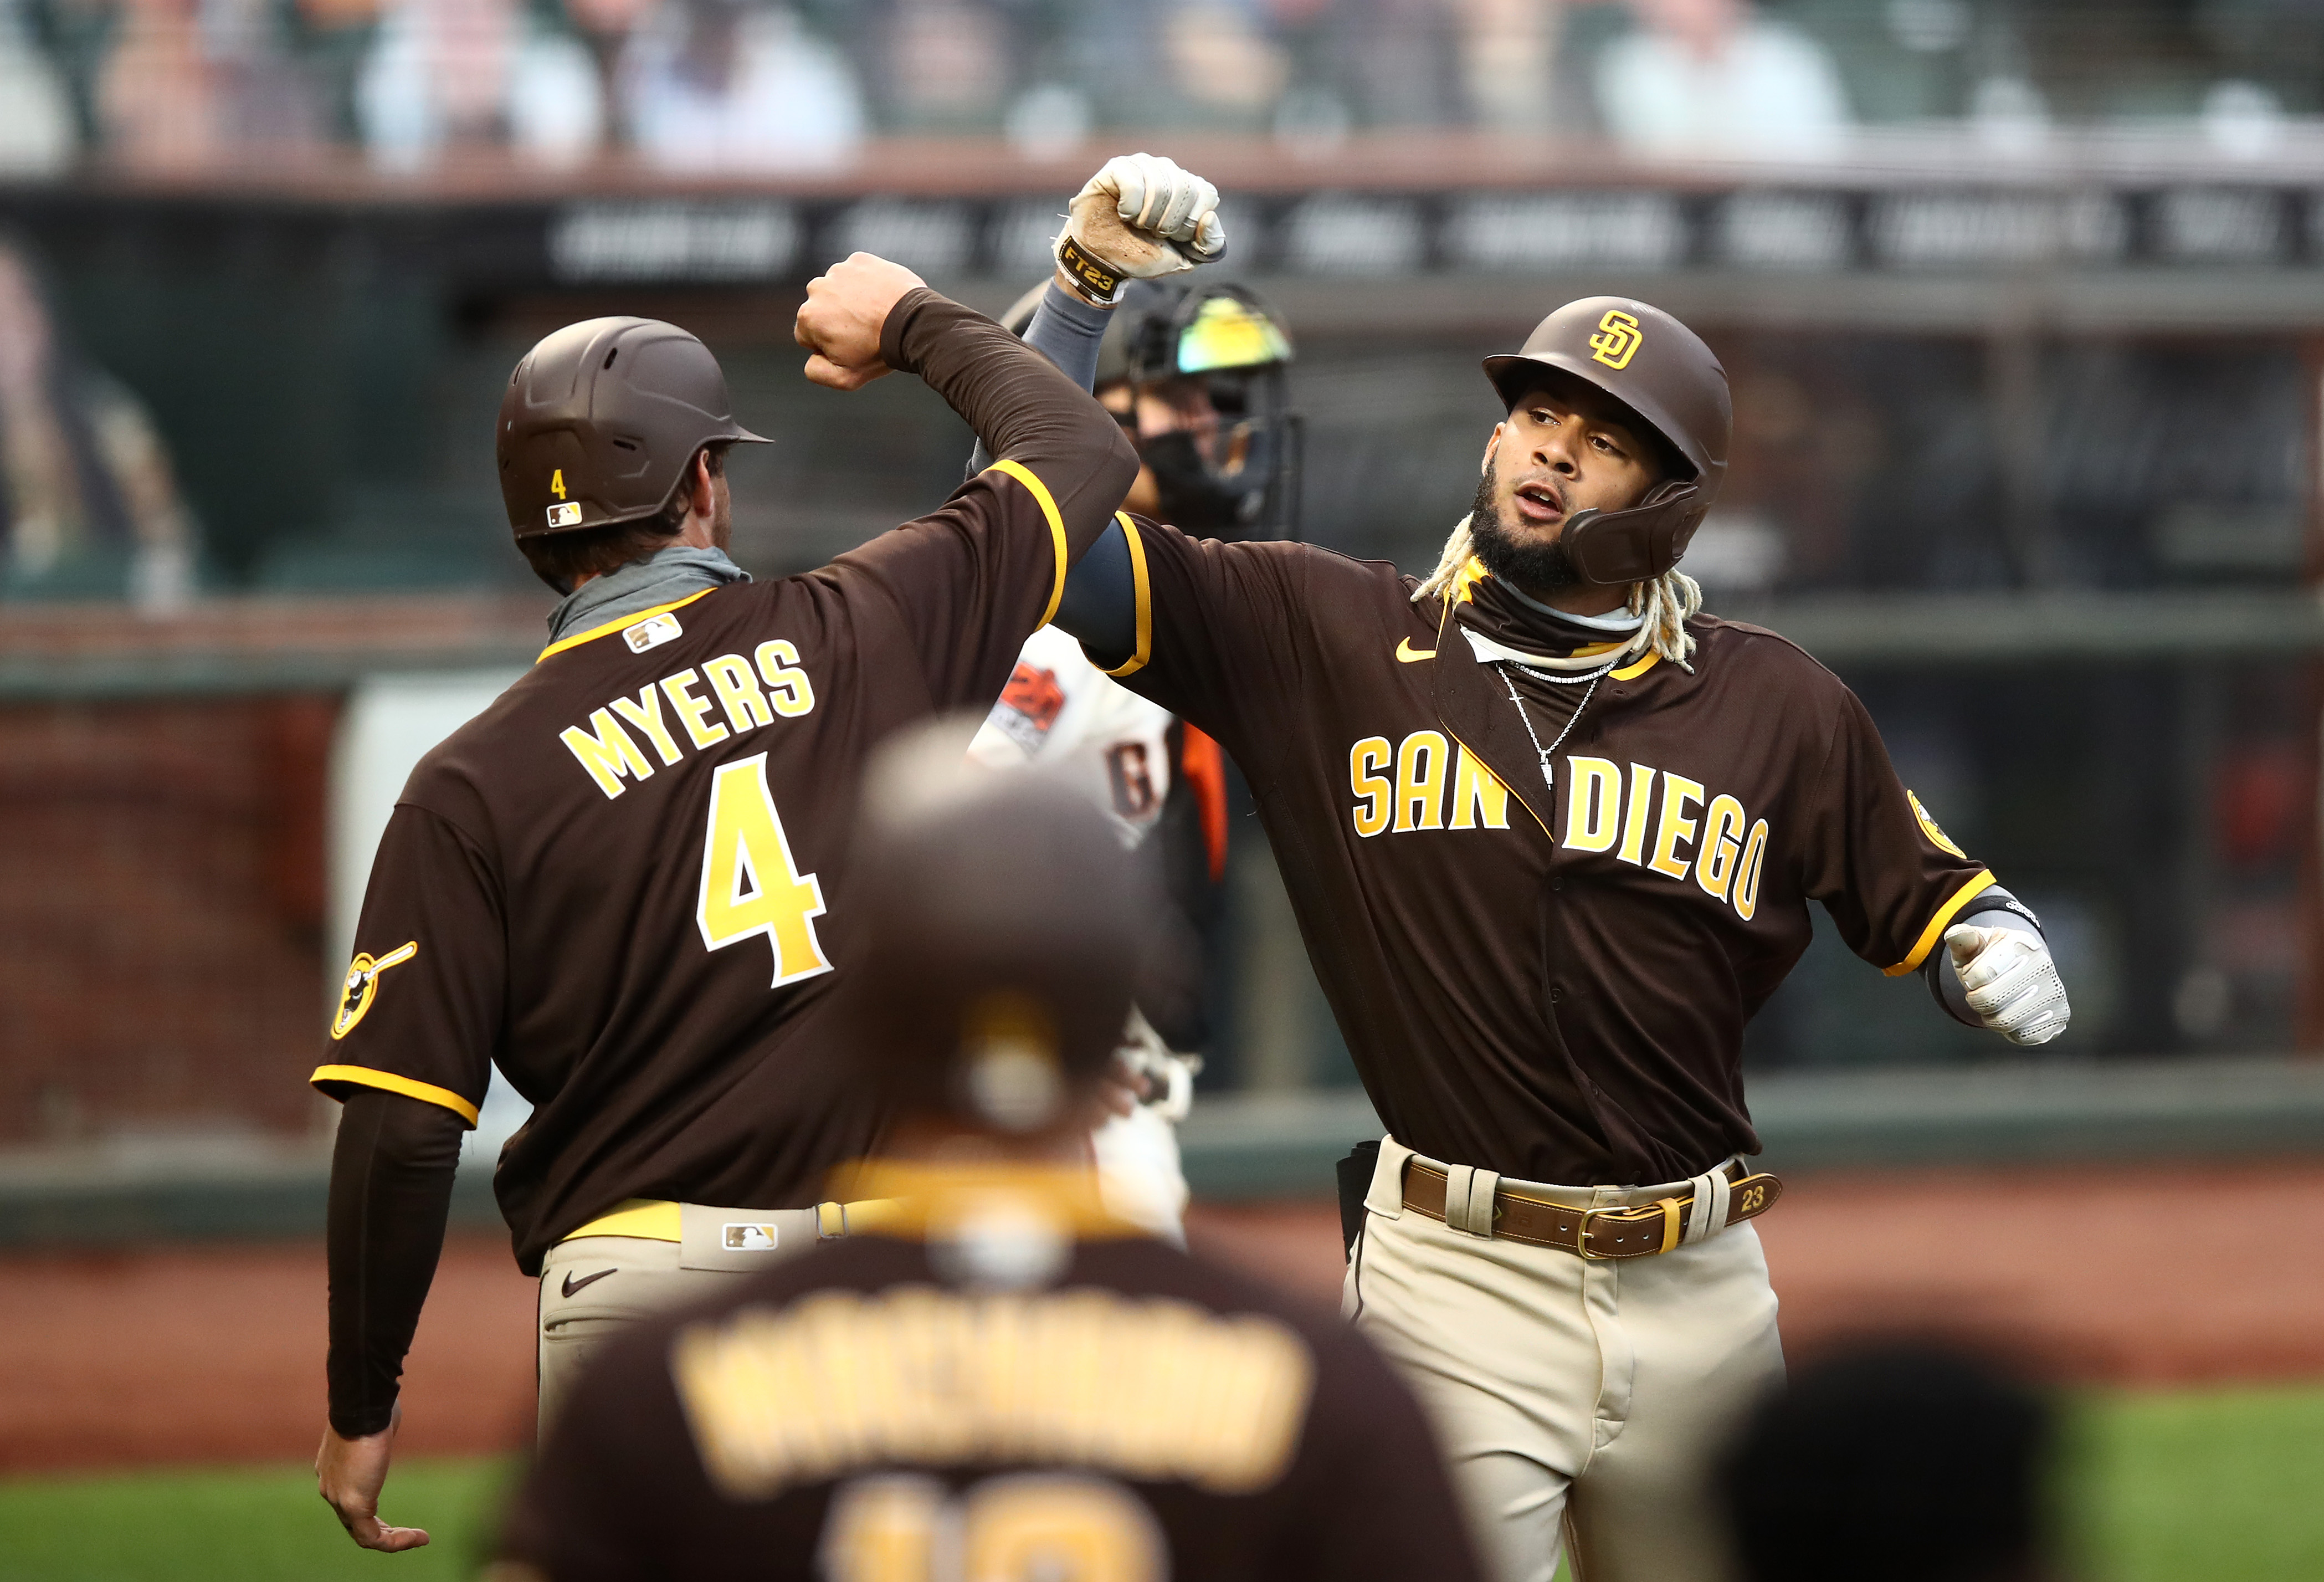 San Diego Padres roster and schedule for 2020 season - NBC Sports